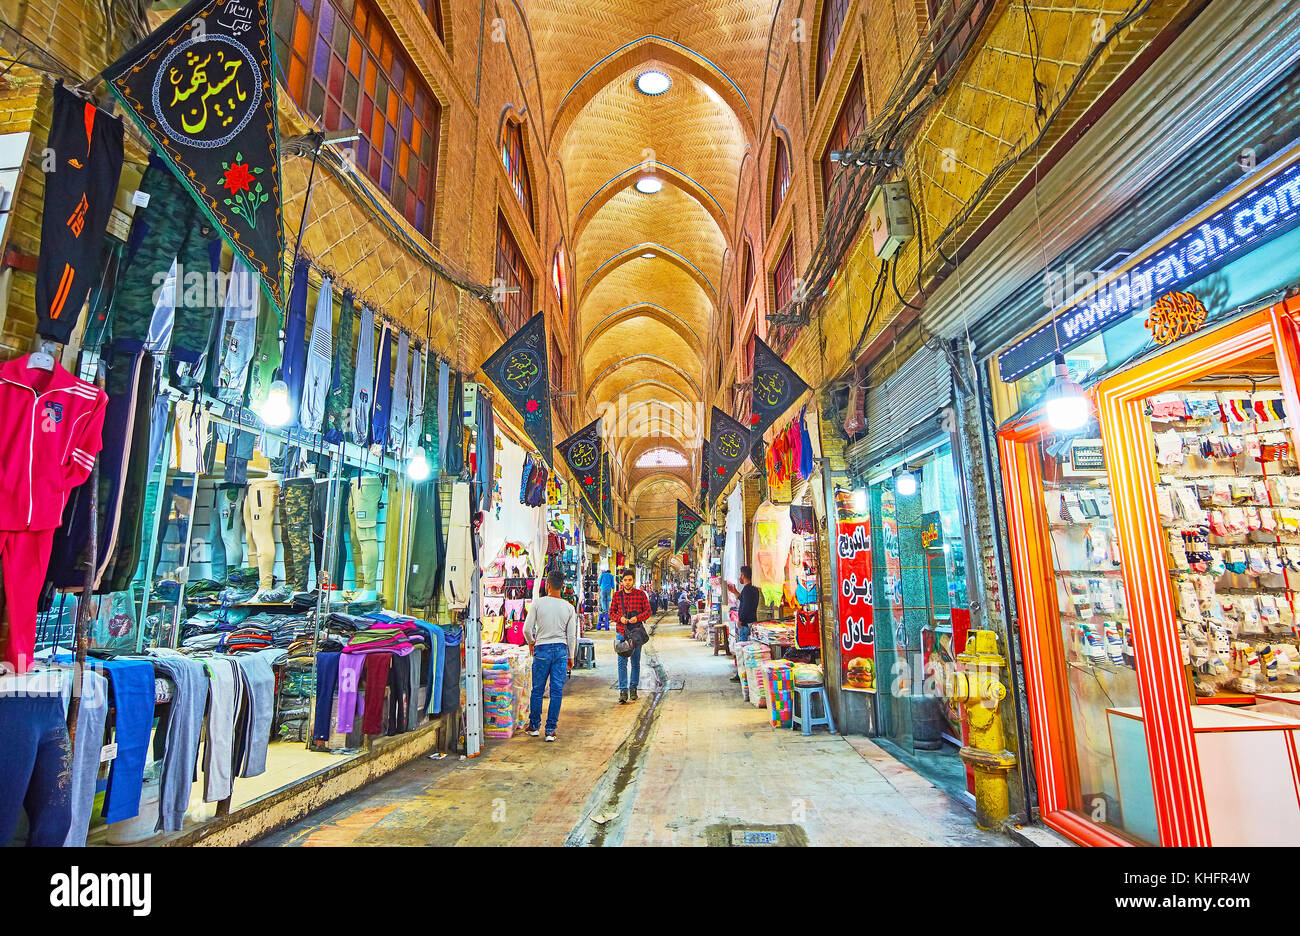 TEHRAN, IRAN - OCTOBER 11, 2017: The narrow archway in Grand Bazaar, traditional Eastern market, located in old town, on October 11 in Tehran. Stock Photo